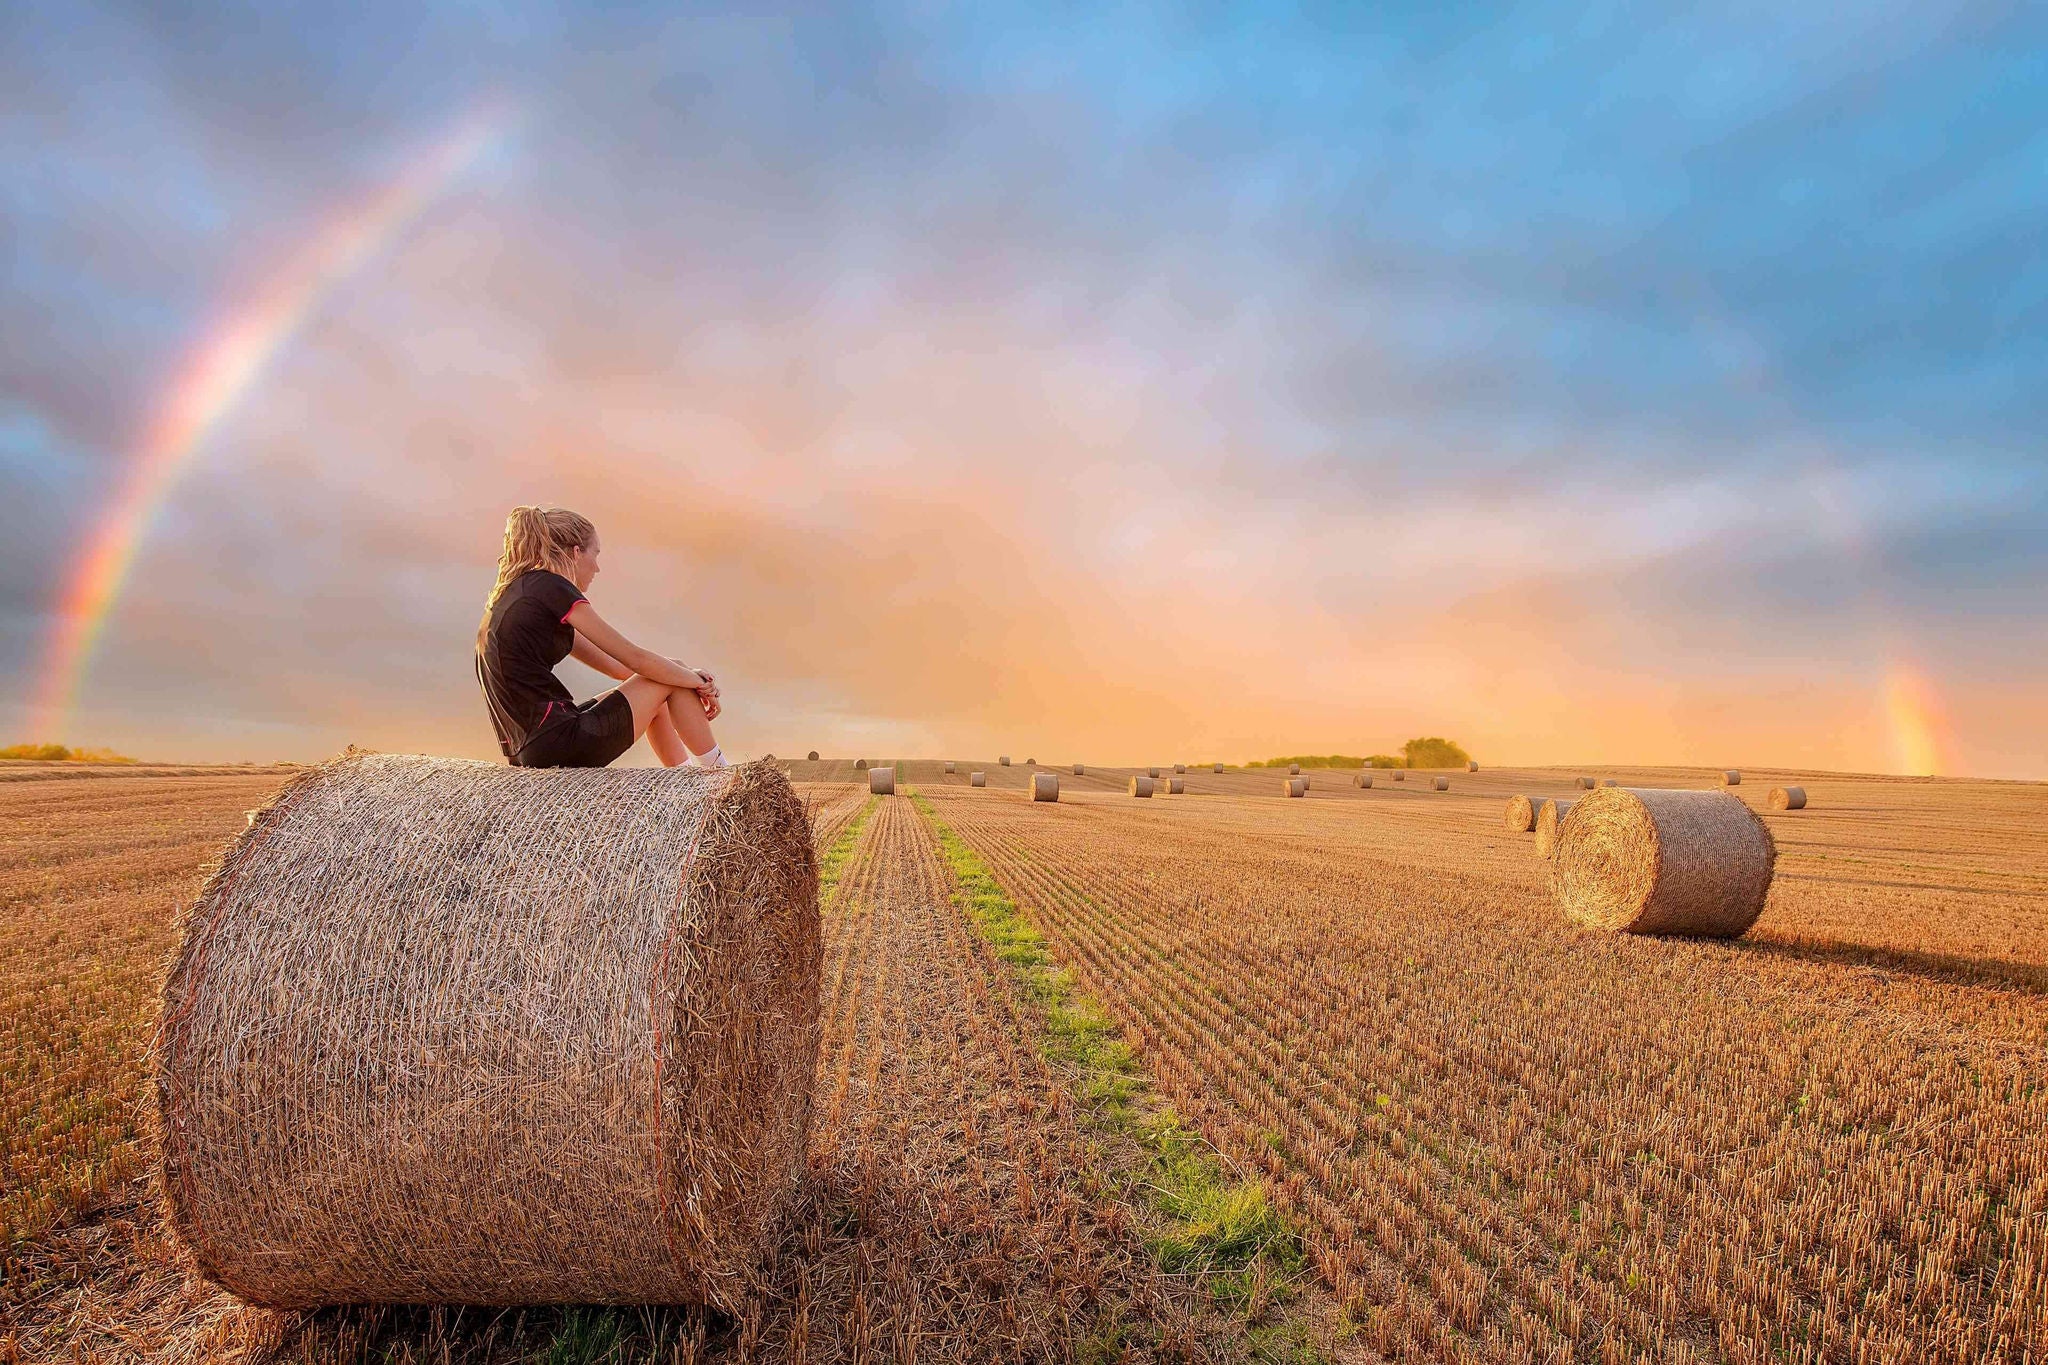 Woman looking sat on hay Bales as a rainbow appears after a rain shower